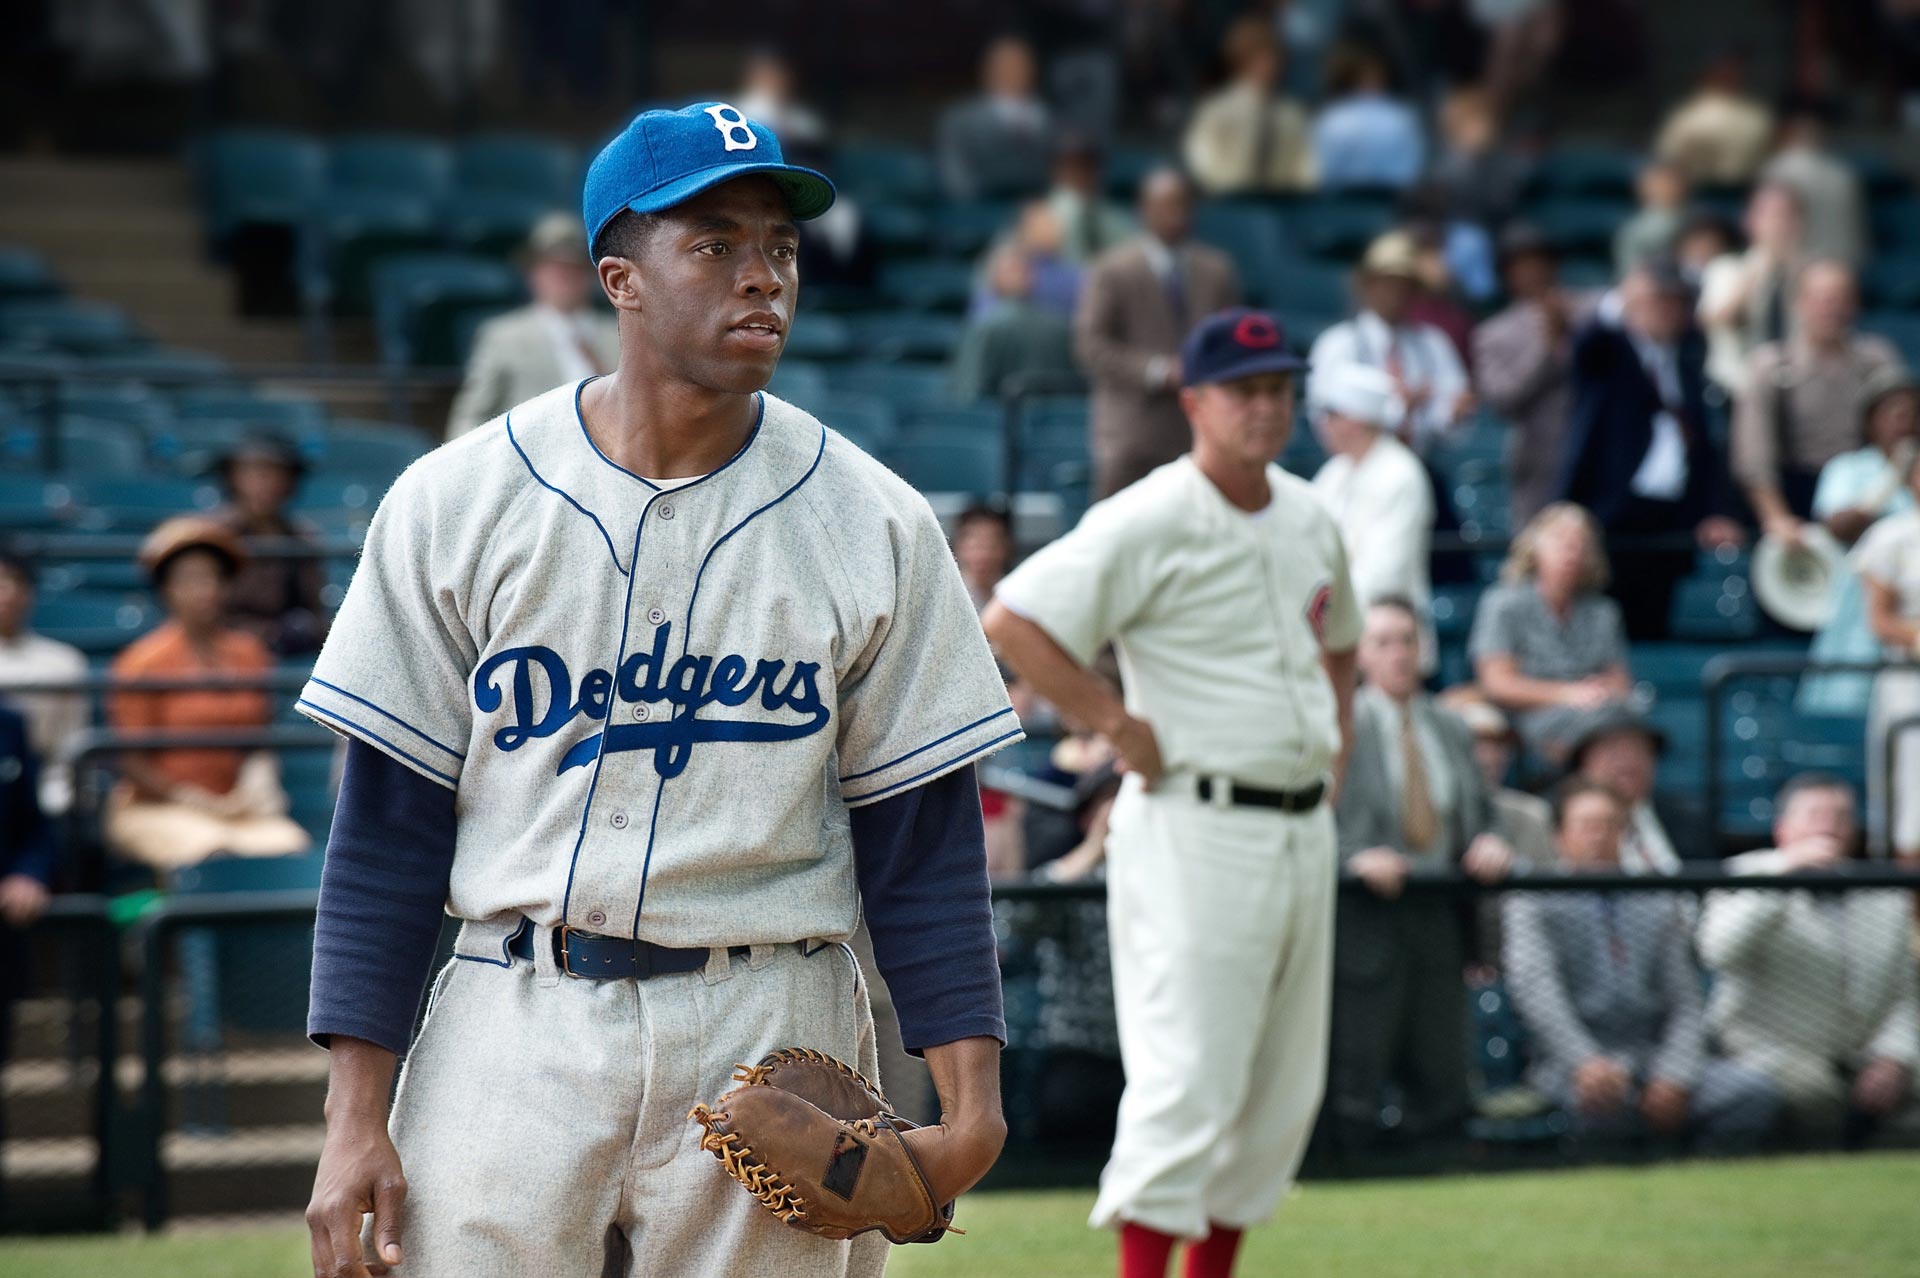 A Jackie Robinson Biopic, Released At A Time When Few Blacks Play Pro Ball